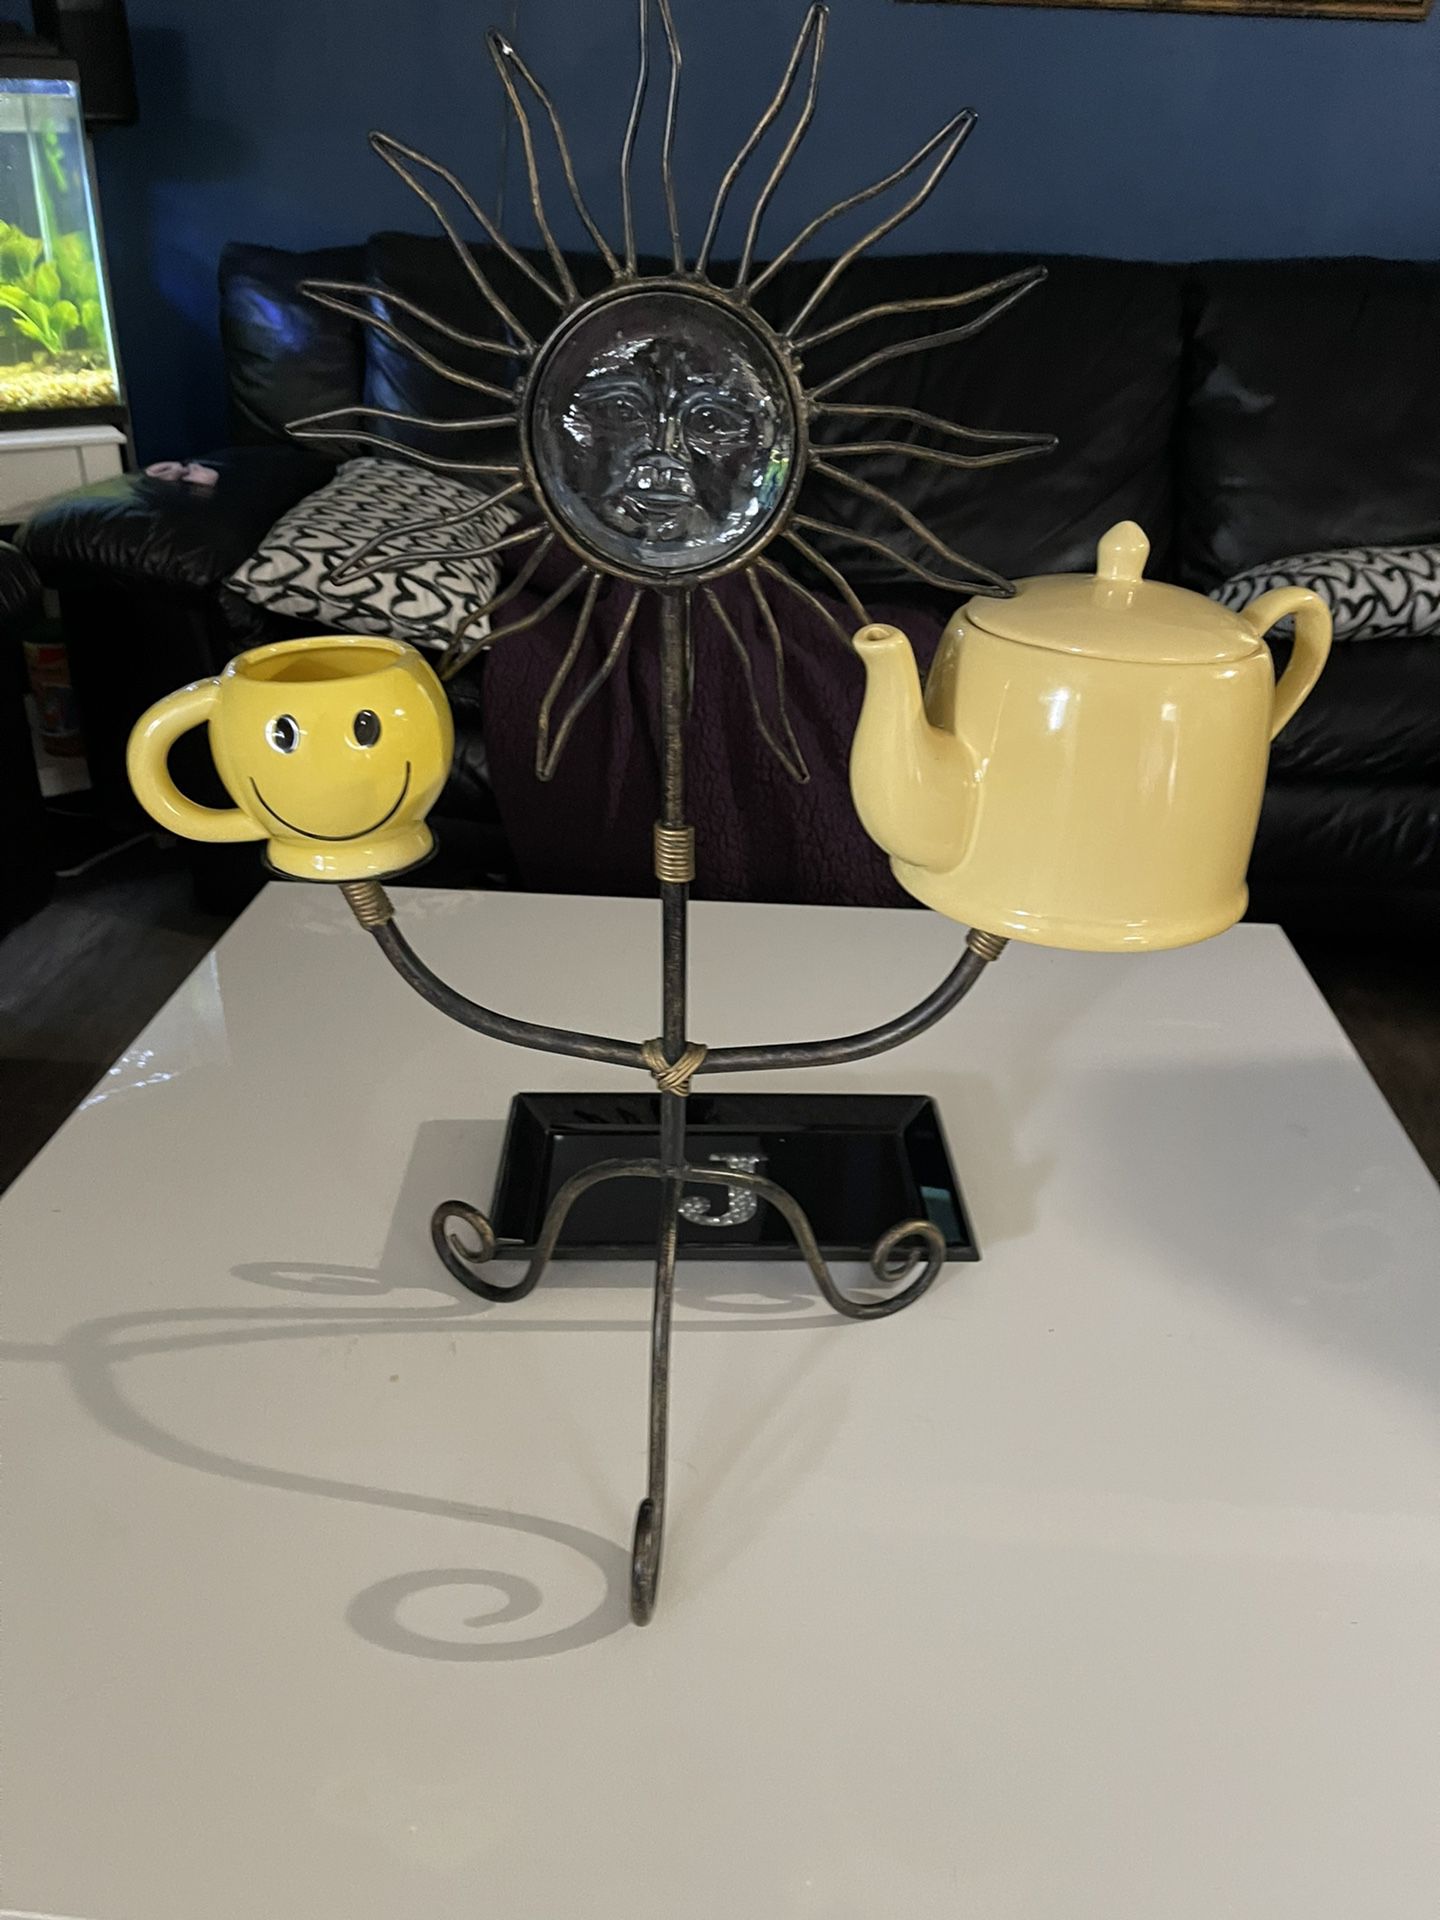 Morning Coffee Centerpiece Teapot & Cup